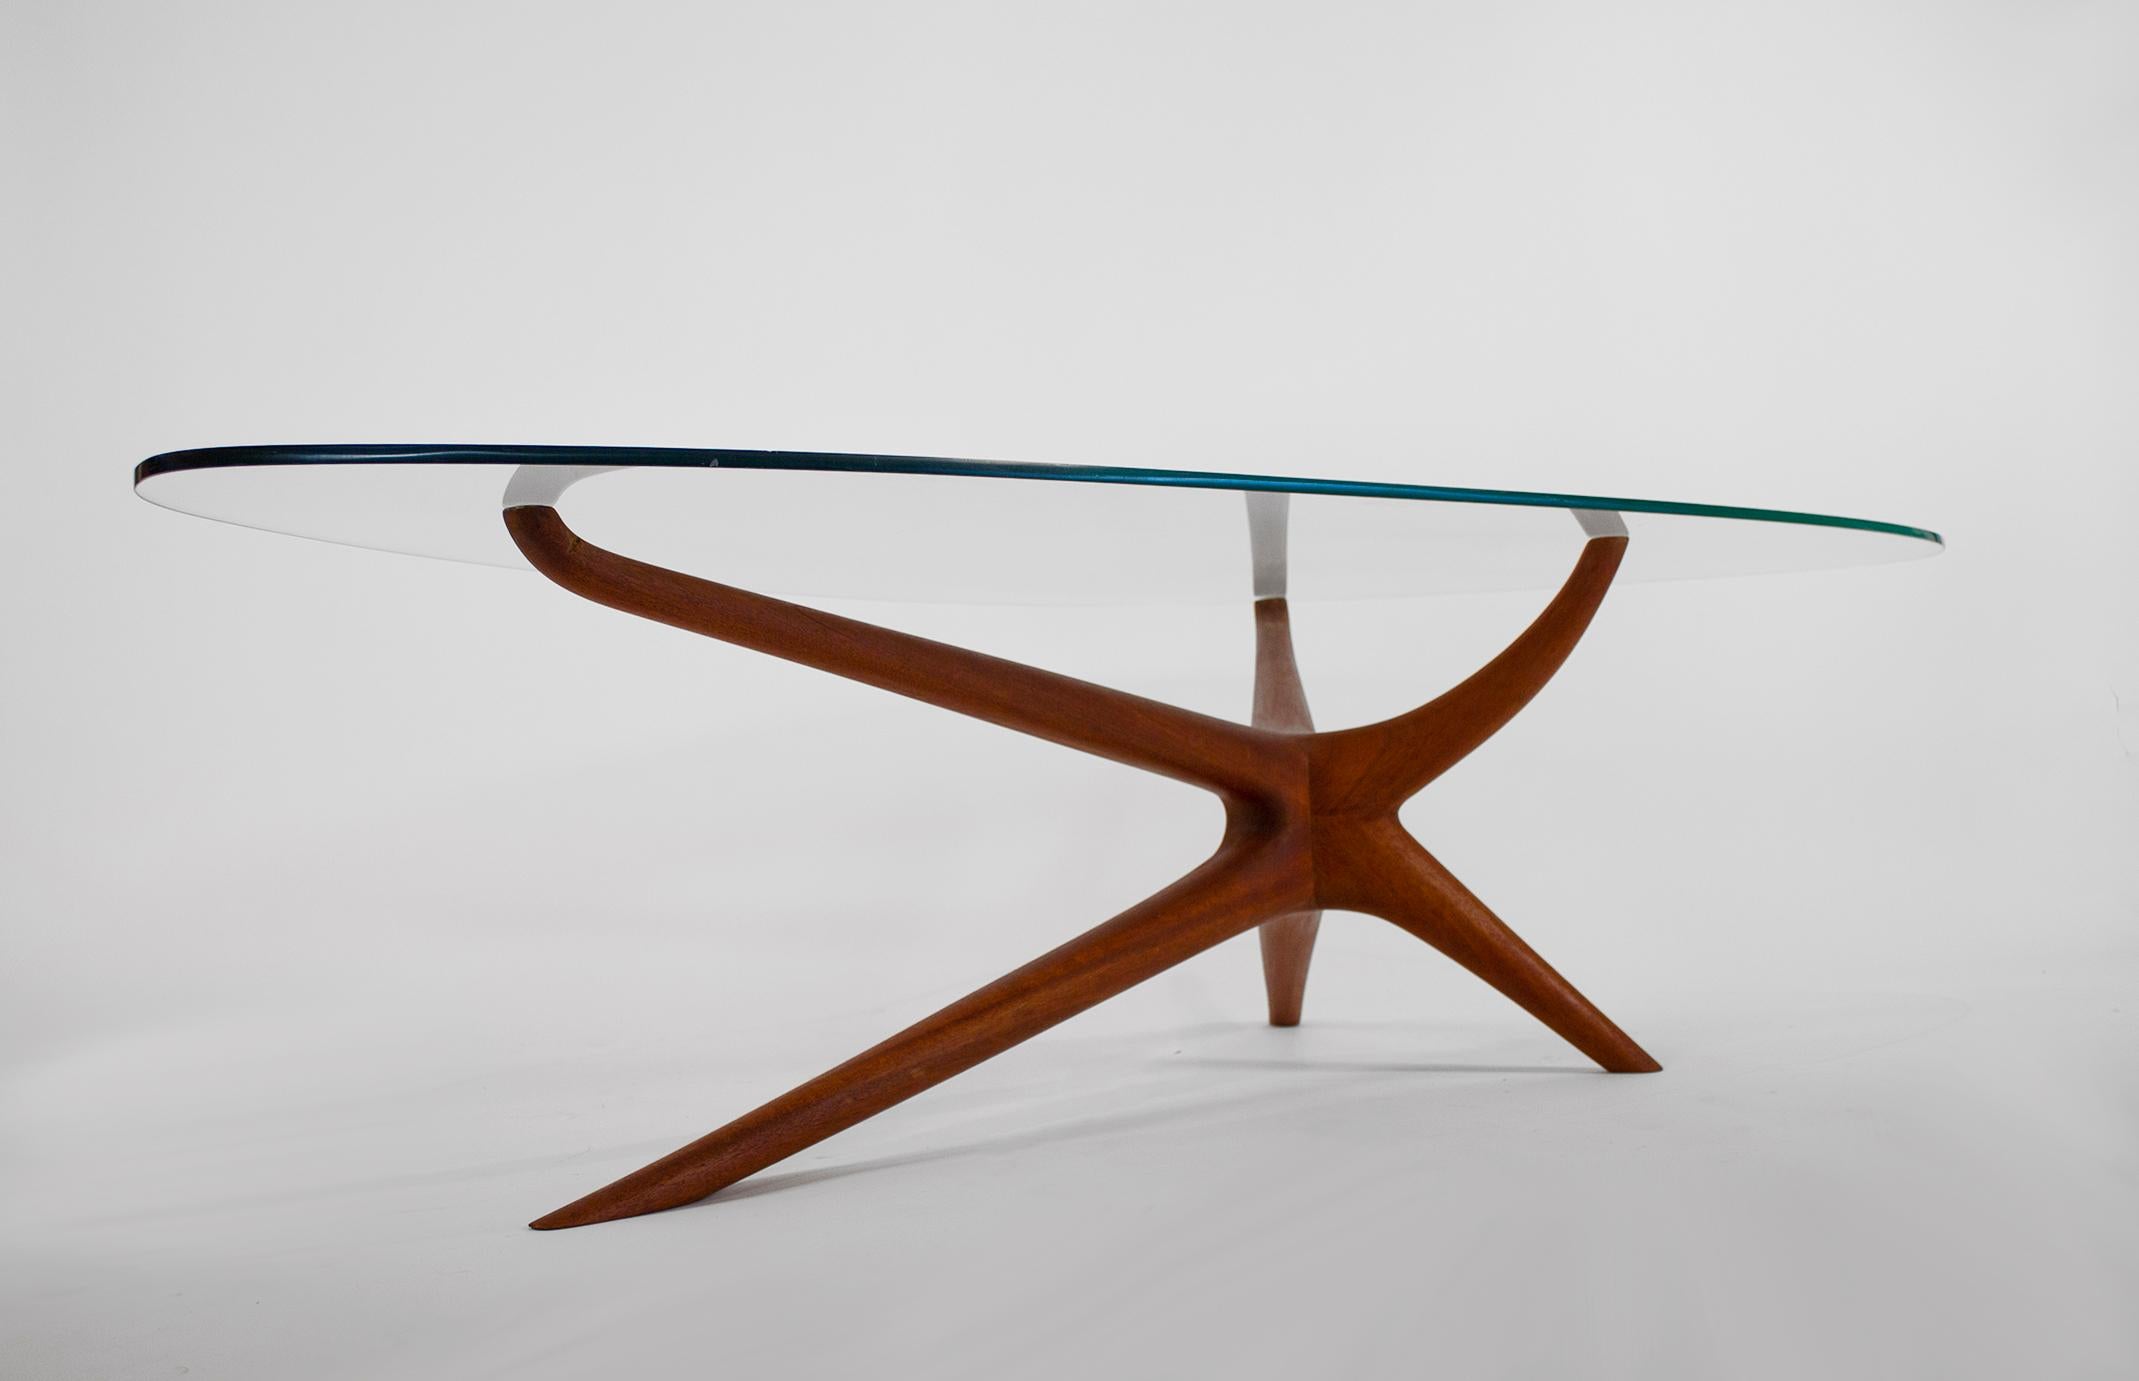 Tri-symmetric shaped coffee table, circa 1953. Solid mahogany with original glass top. In the manner of Vladimir Kagan with cleaner joinery.